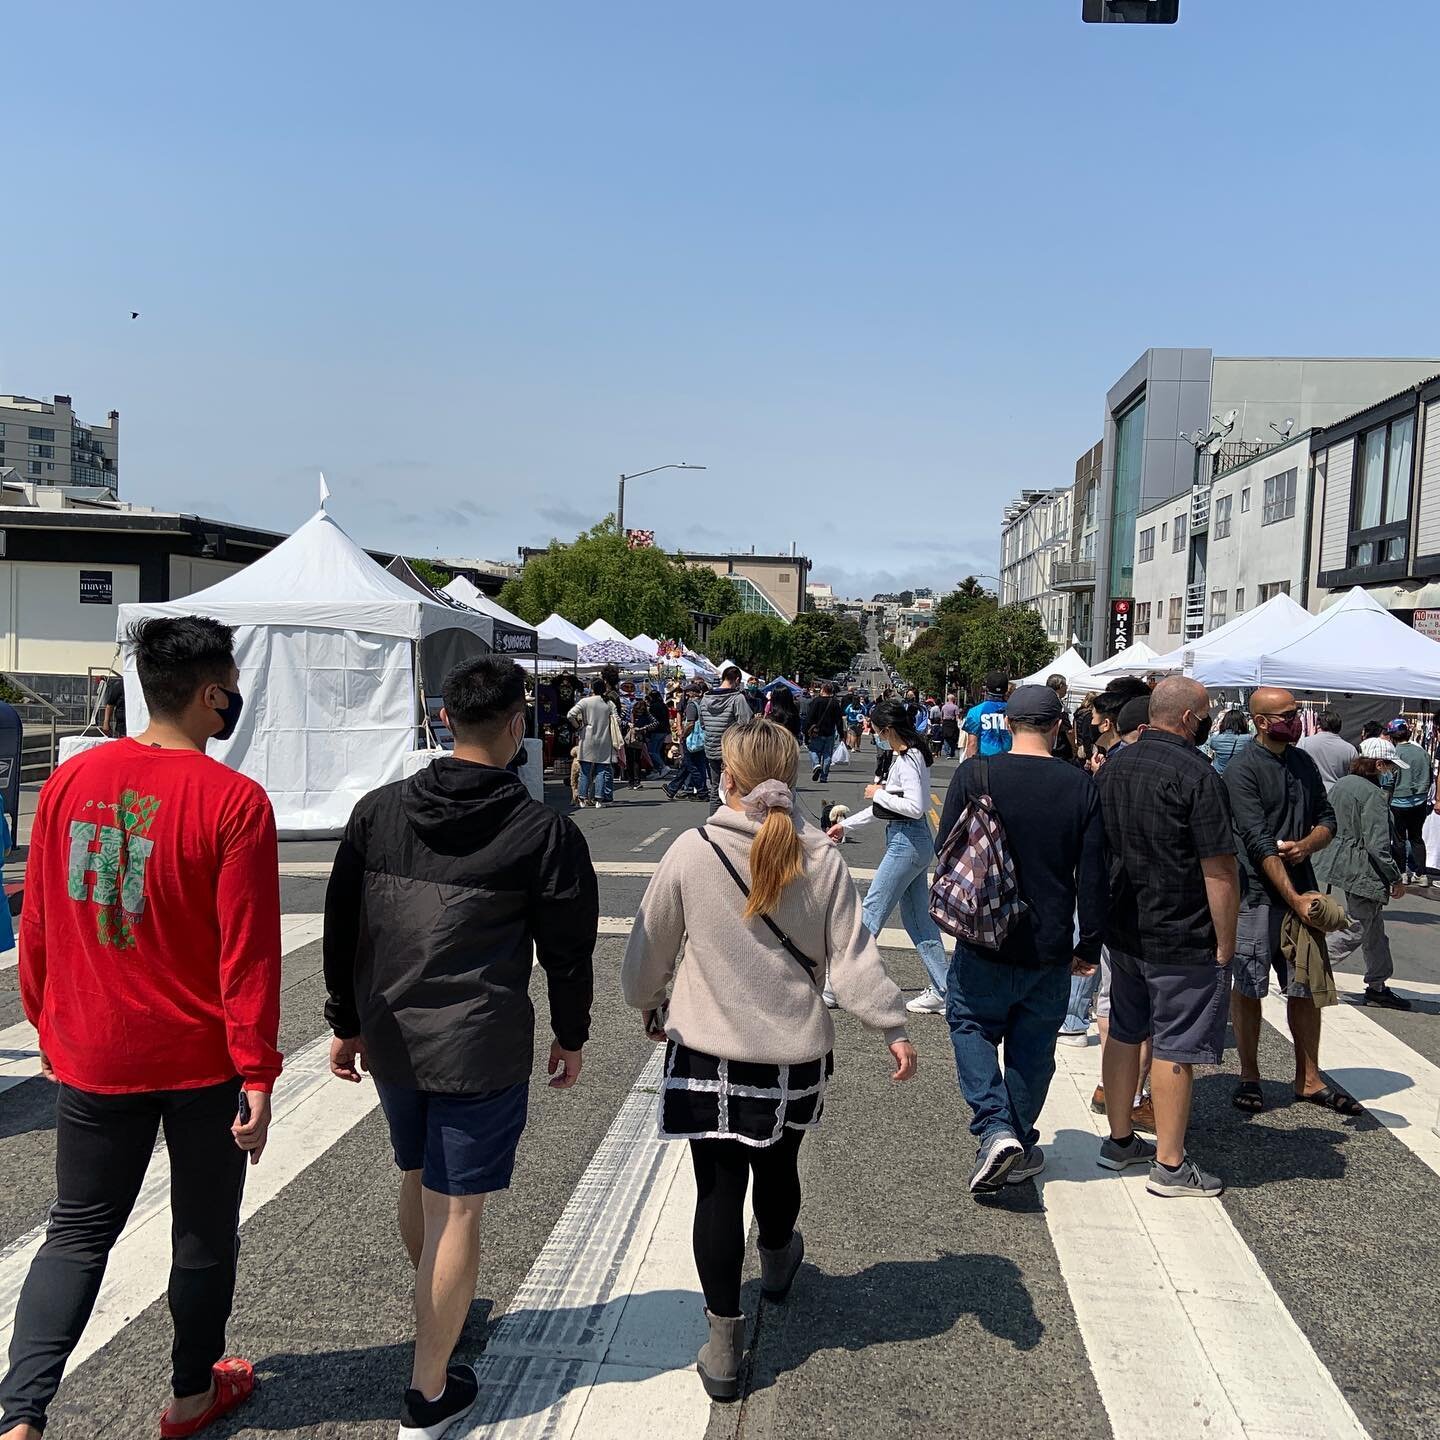 Already a lot of folks today for the 47th Annual Nihonmachi Street Fair!!
#nsf47 #nihonmachisf #nsfsoundsofthundercarshow #nbcbayareaclosingceremony2020tokyoolympics